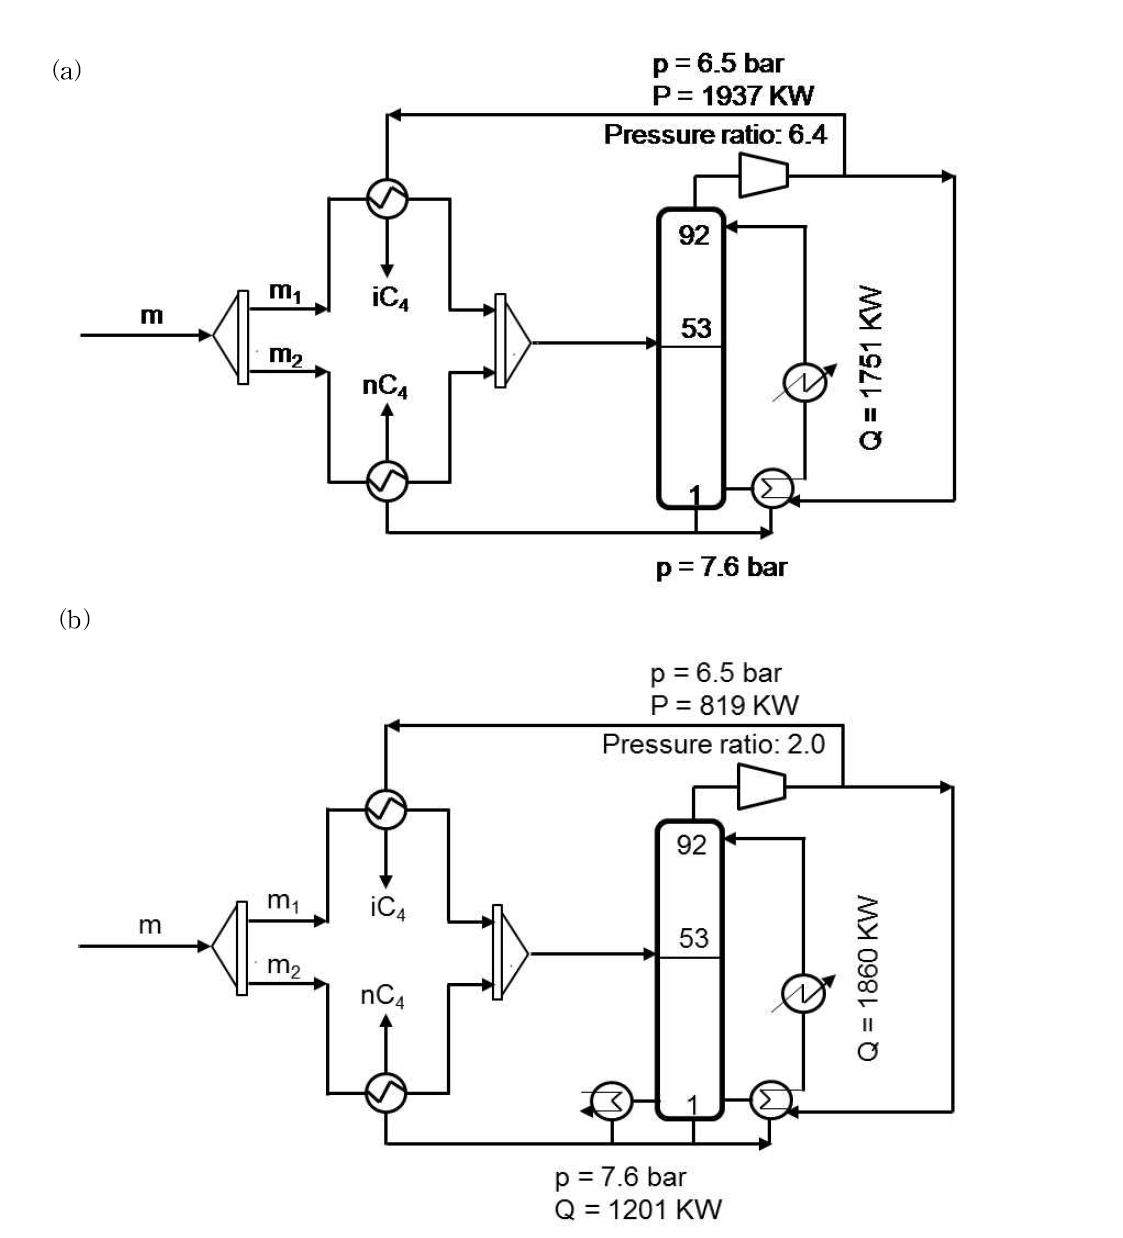 Simplified flow sheet illustrating the self-heat recuperative distillation process for two cases: (a) without reboiler and (b) with reboiler